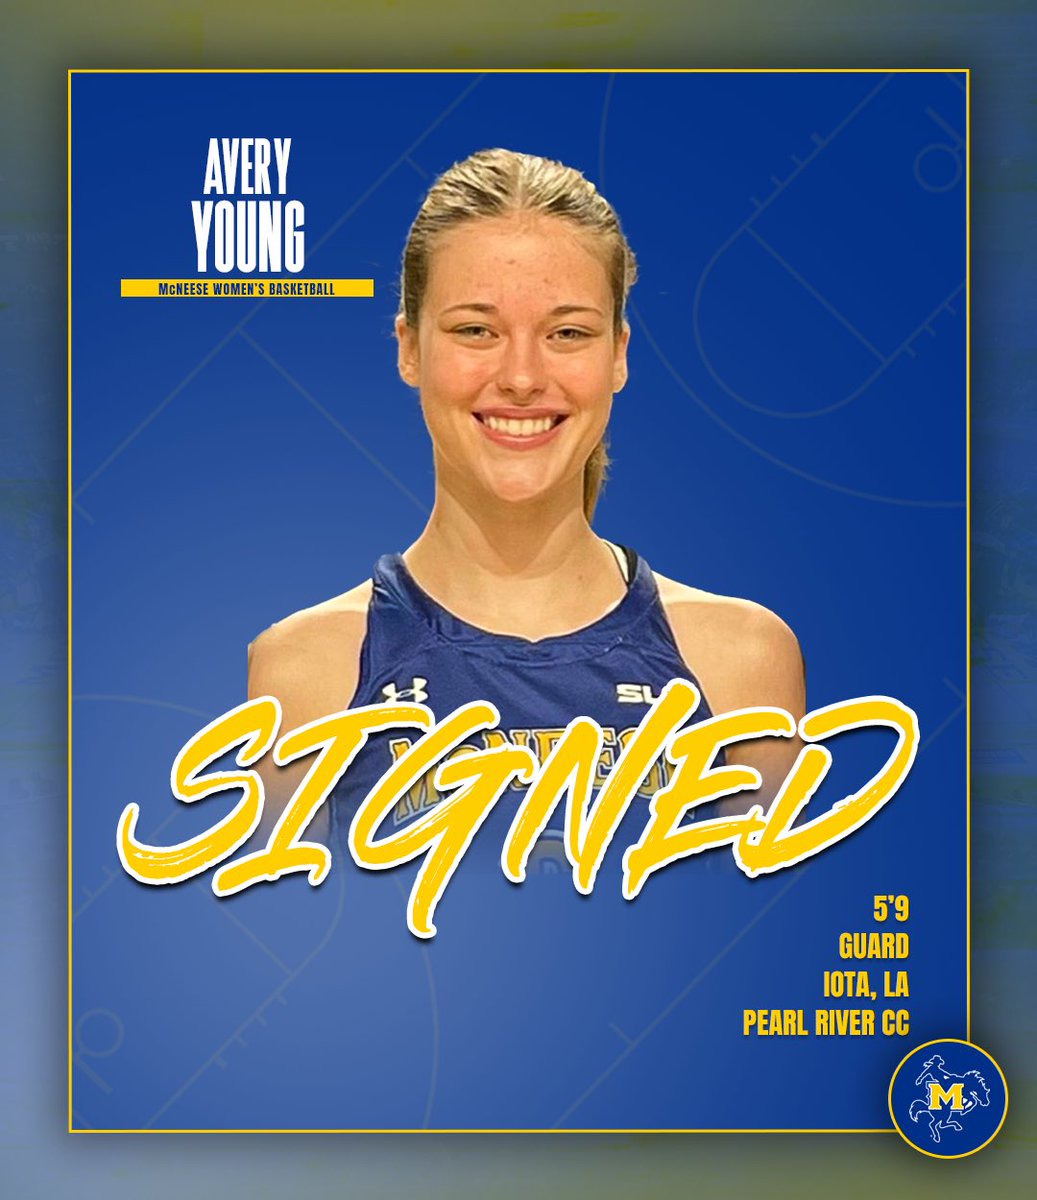 𝐒𝐈𝐆𝐍𝐄𝐃 ✍️ Welcome to Cowgirl Country, Avery! #GeauxPokes